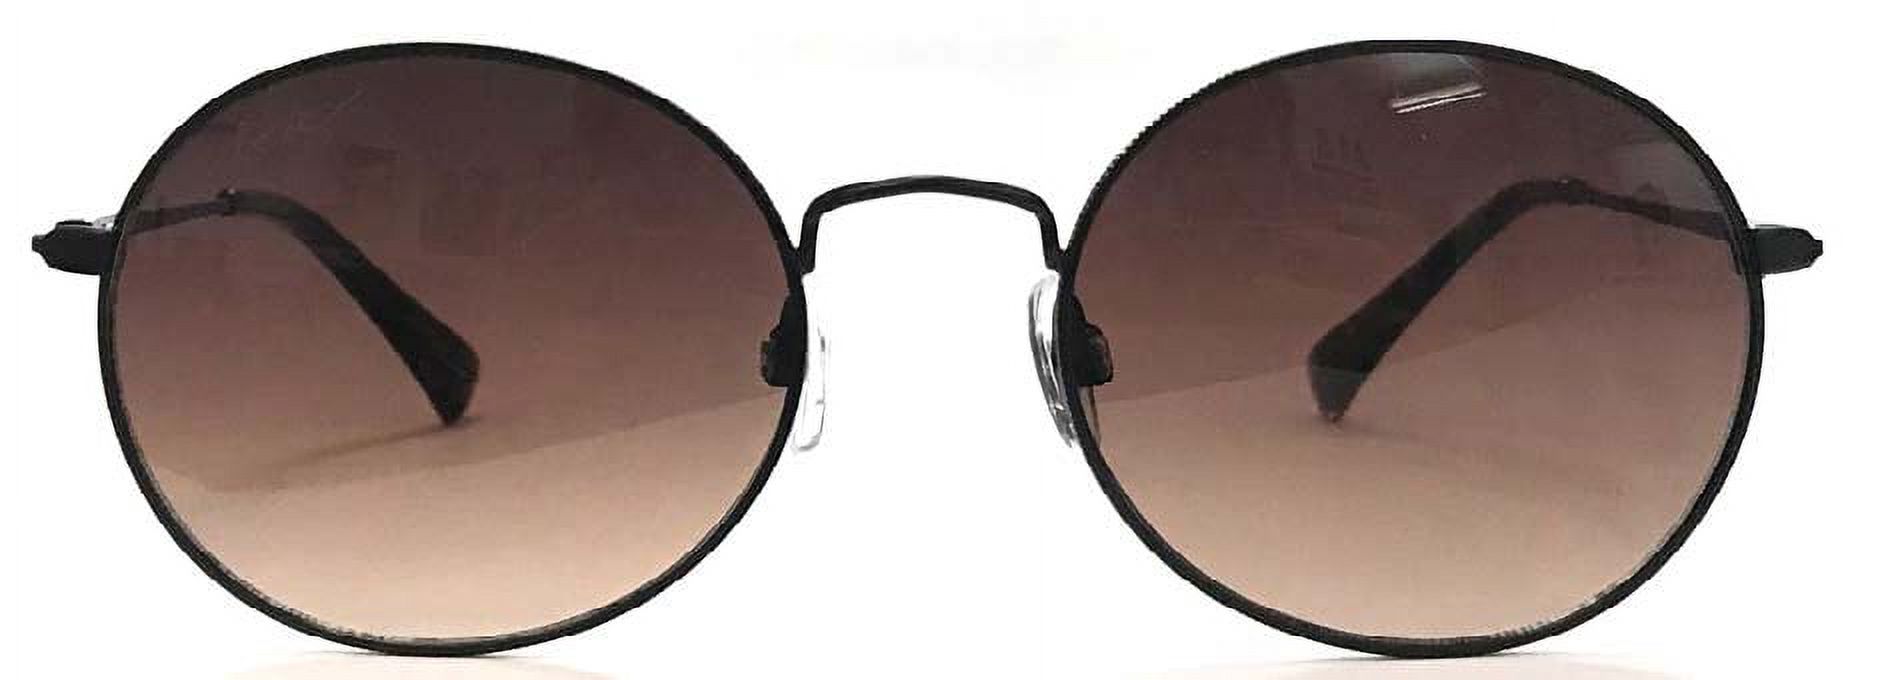 Hard Candy Womens Rx'able Sunglasses, Hs18, Matte Black, 54-19-140, with Case - image 1 of 13